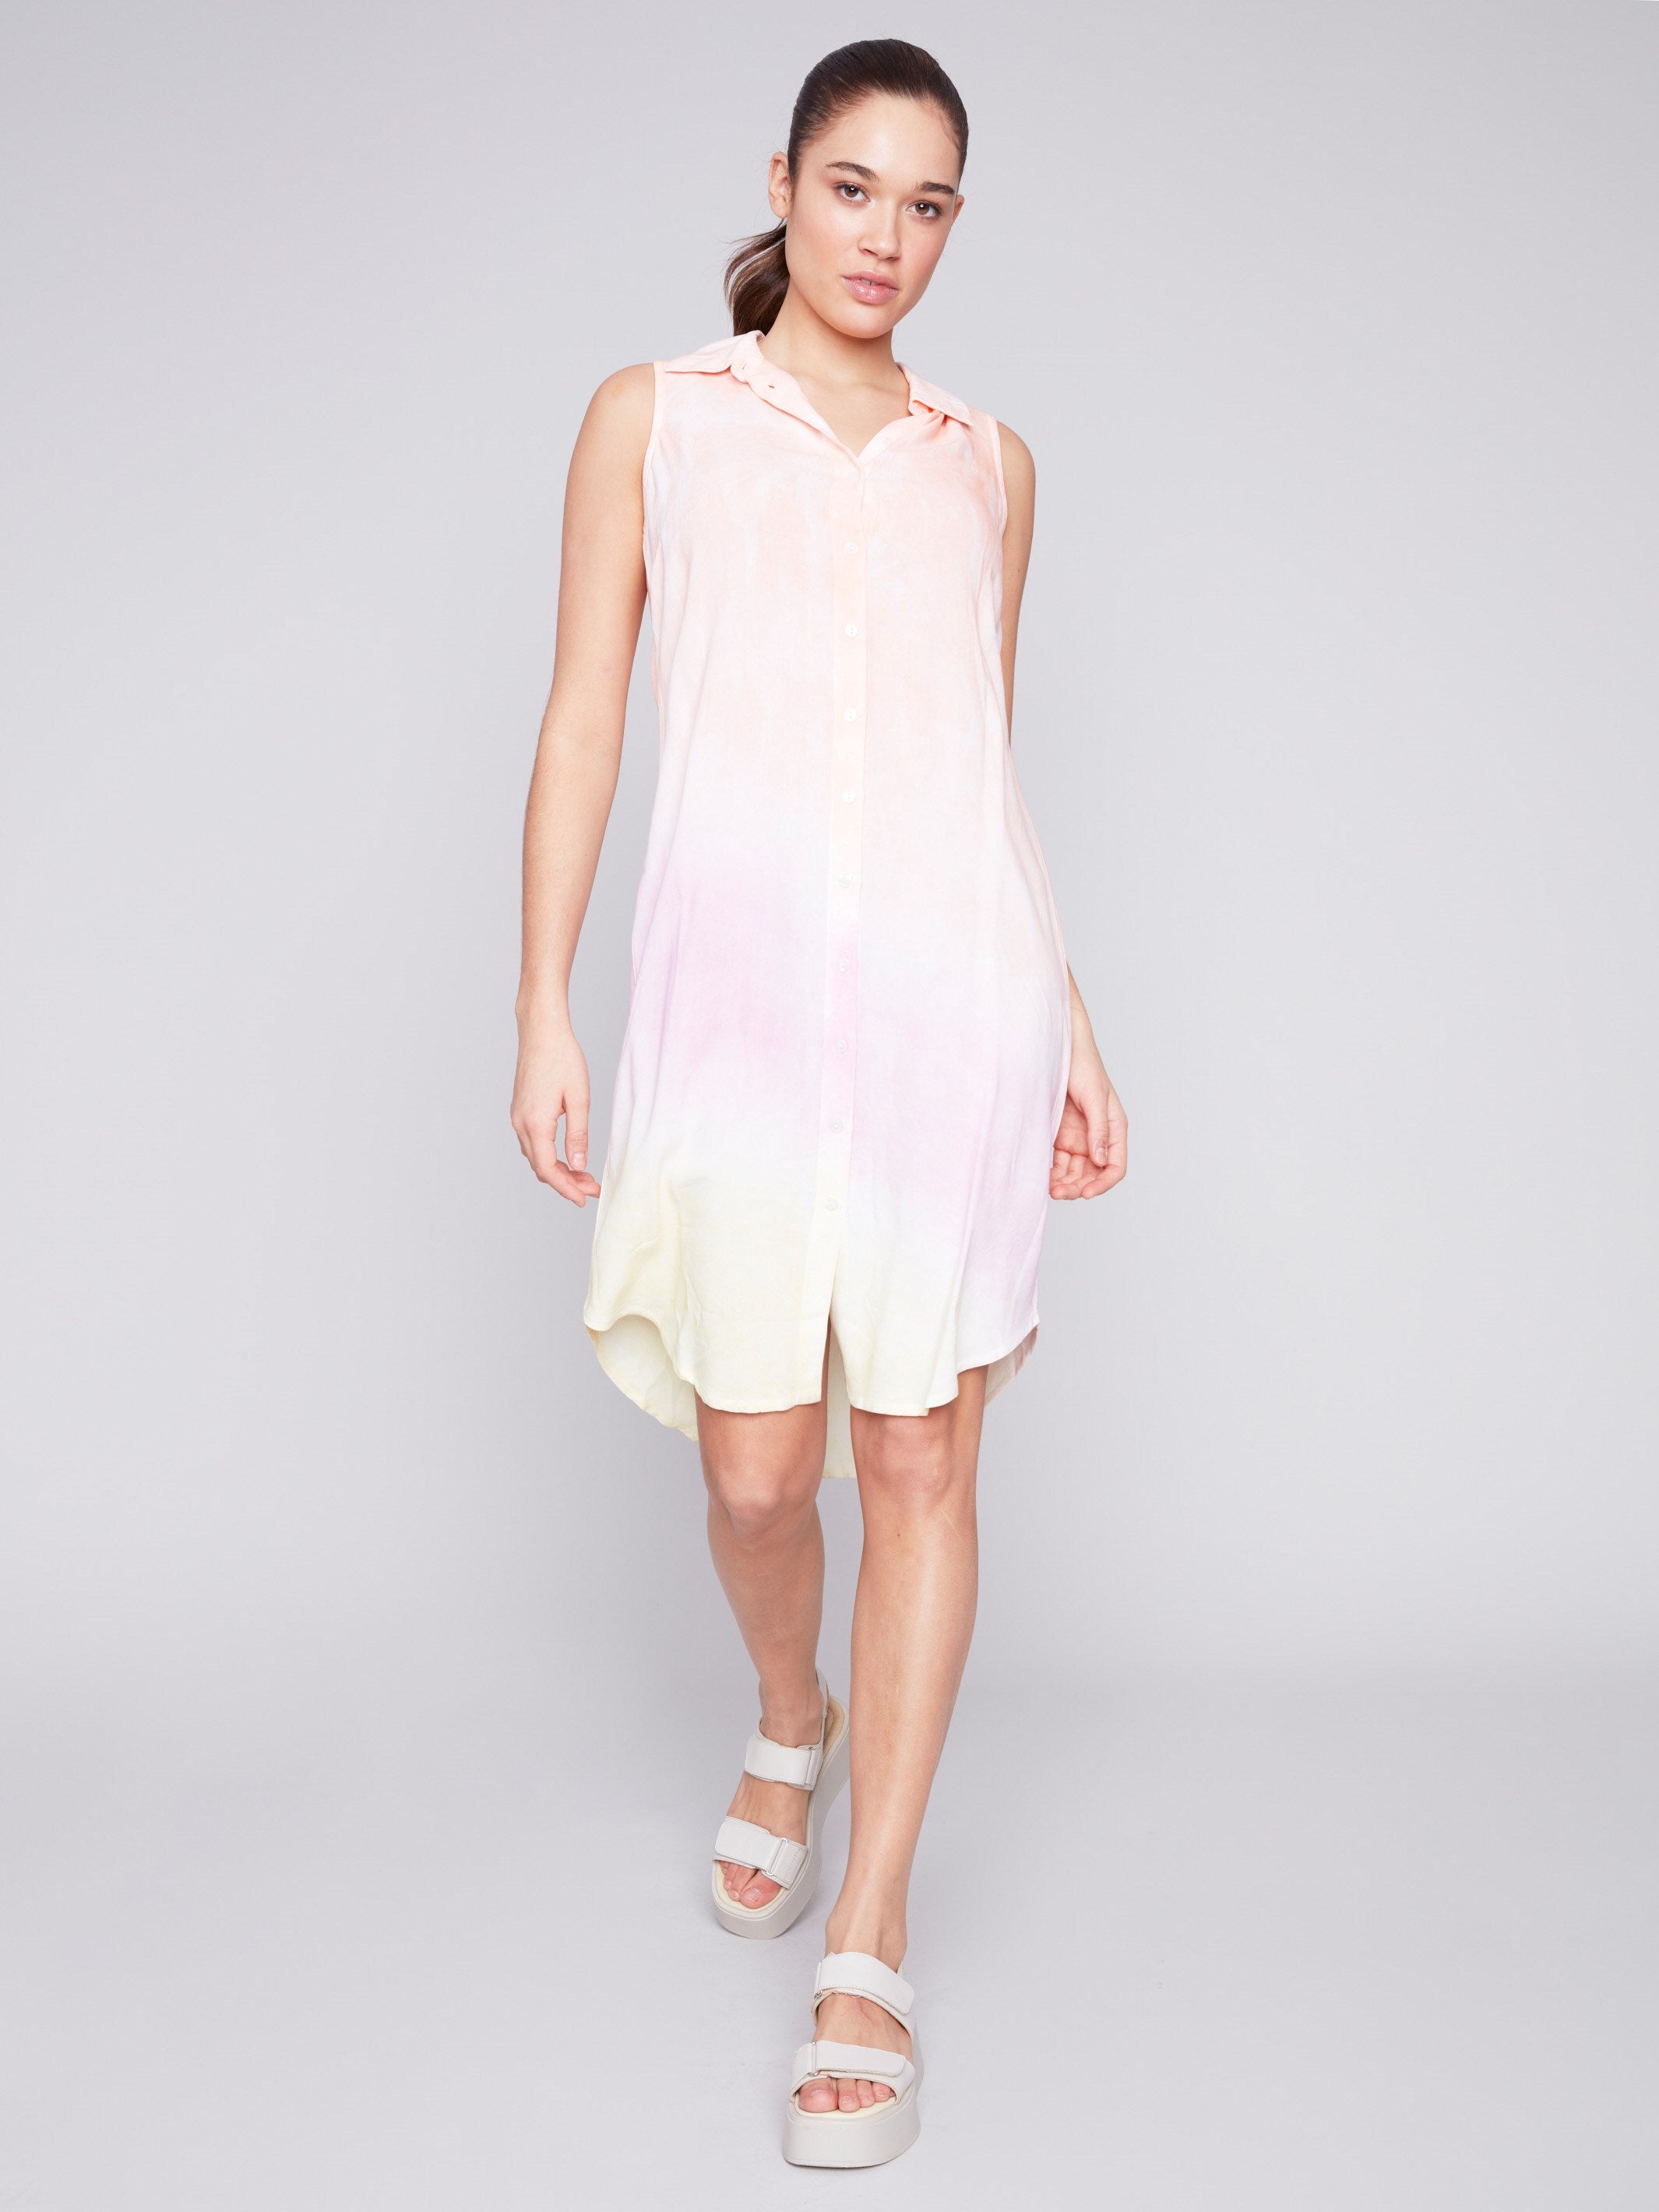 Tie-Dye Sleeveless Button-Front Dress - Dawn - Charlie B Collection Canada - Image 4